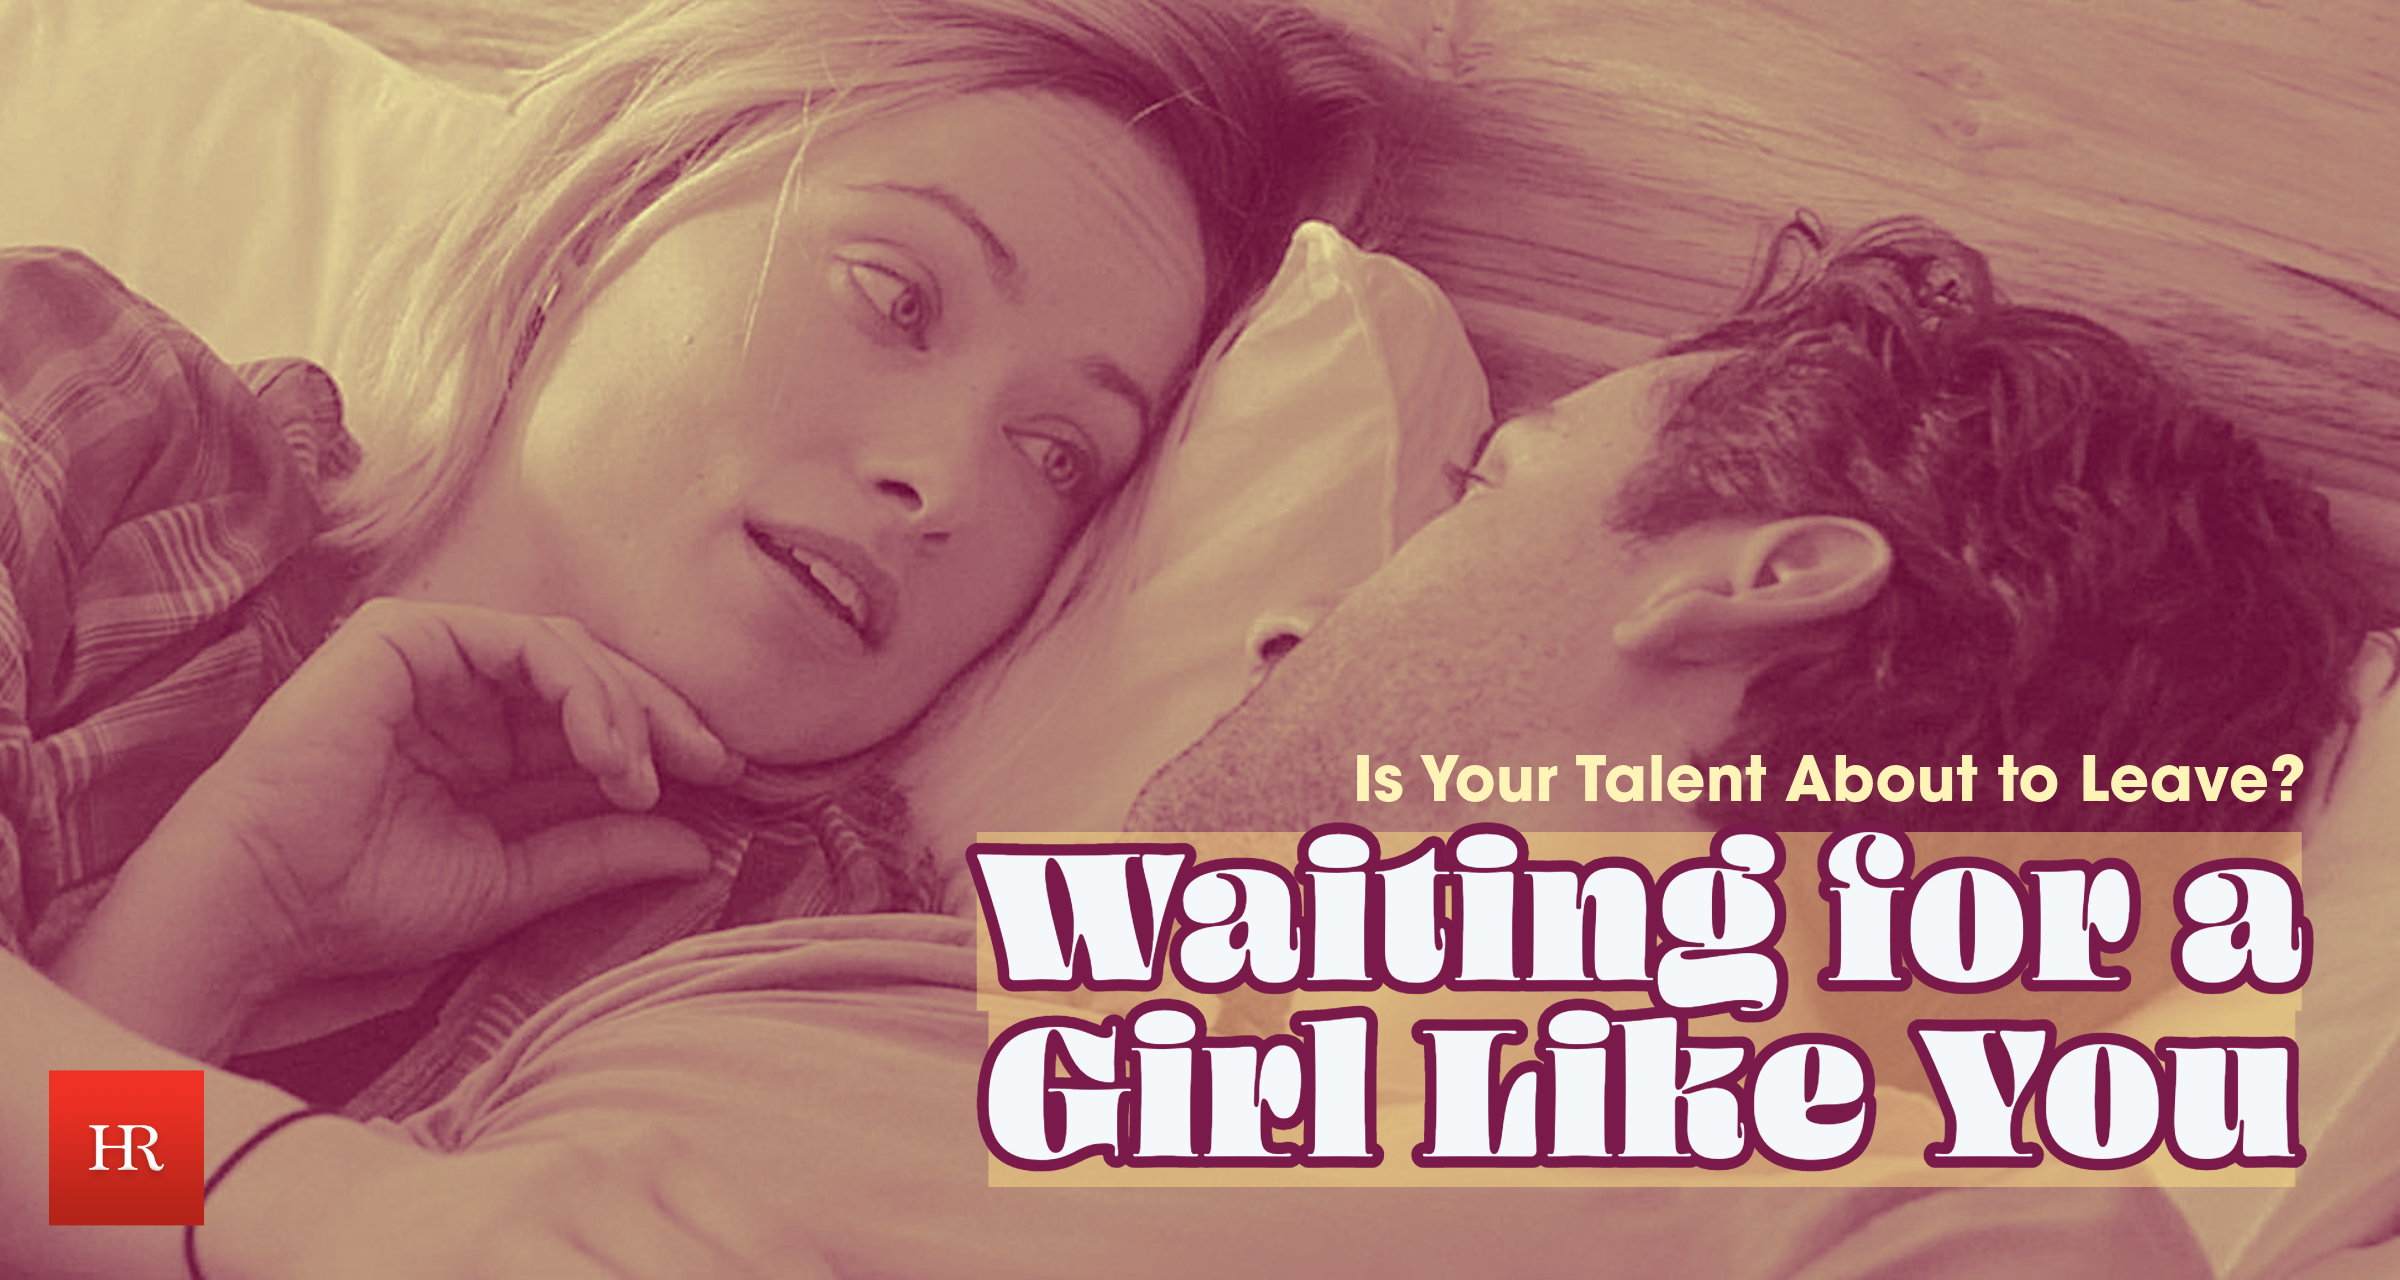 Waiting for a girl like you